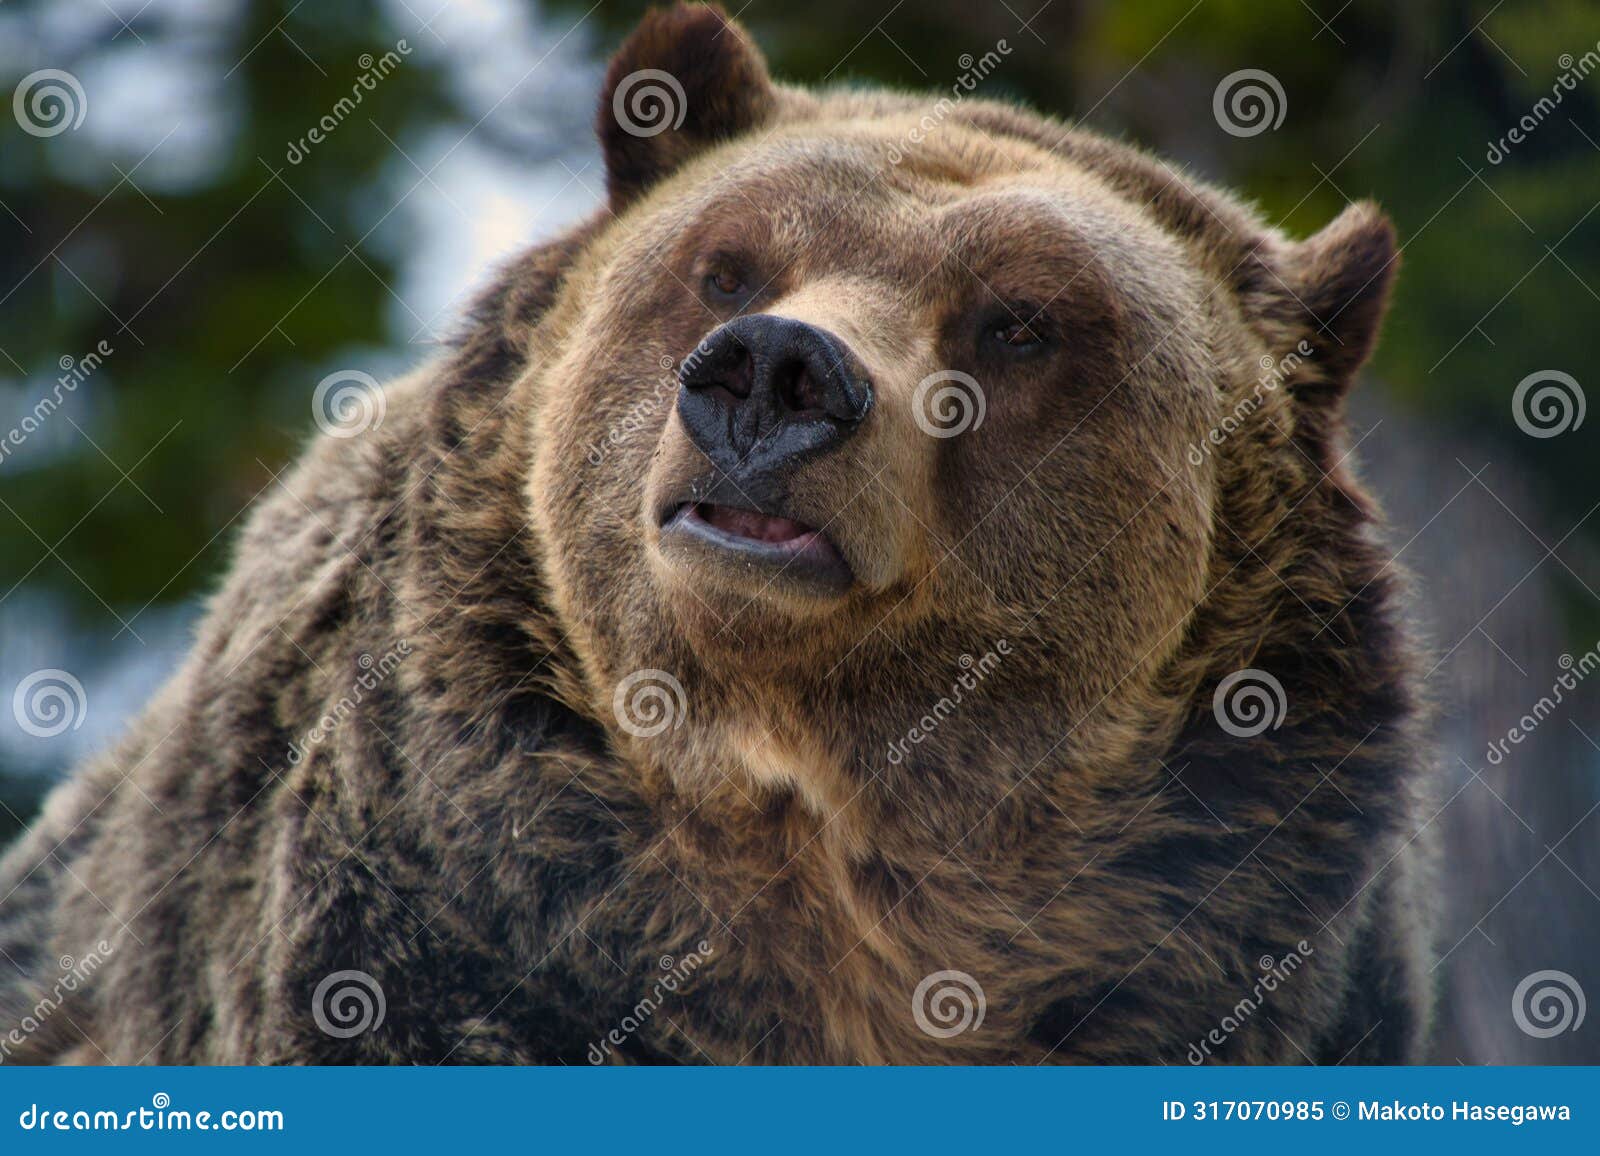 a closeup of a male grizzly bear's face. grouse mountain, north vancouver, canada